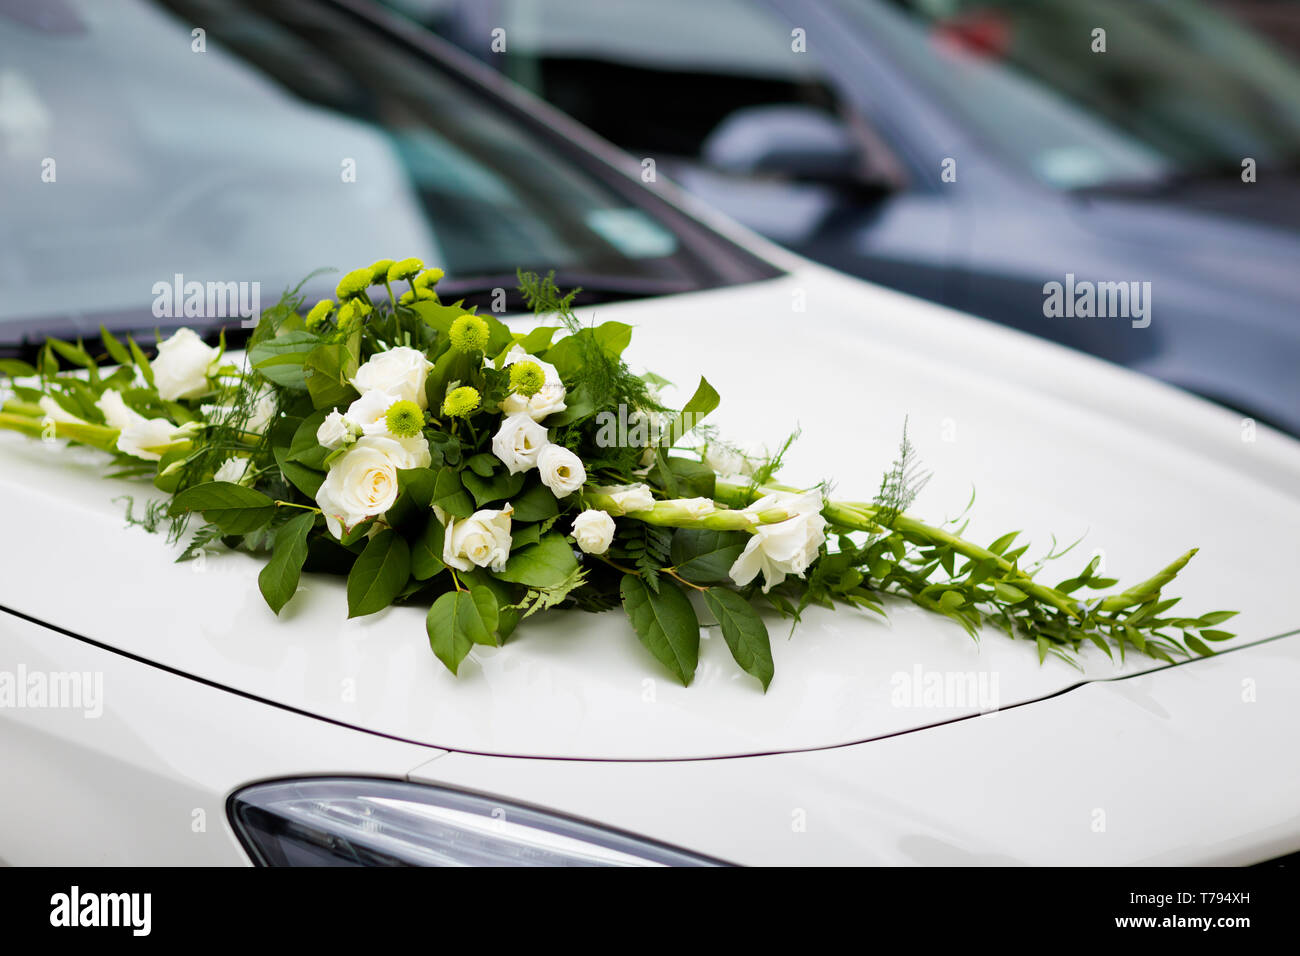 Wedding detail - beautiful car decoration made of flowers Stock ...